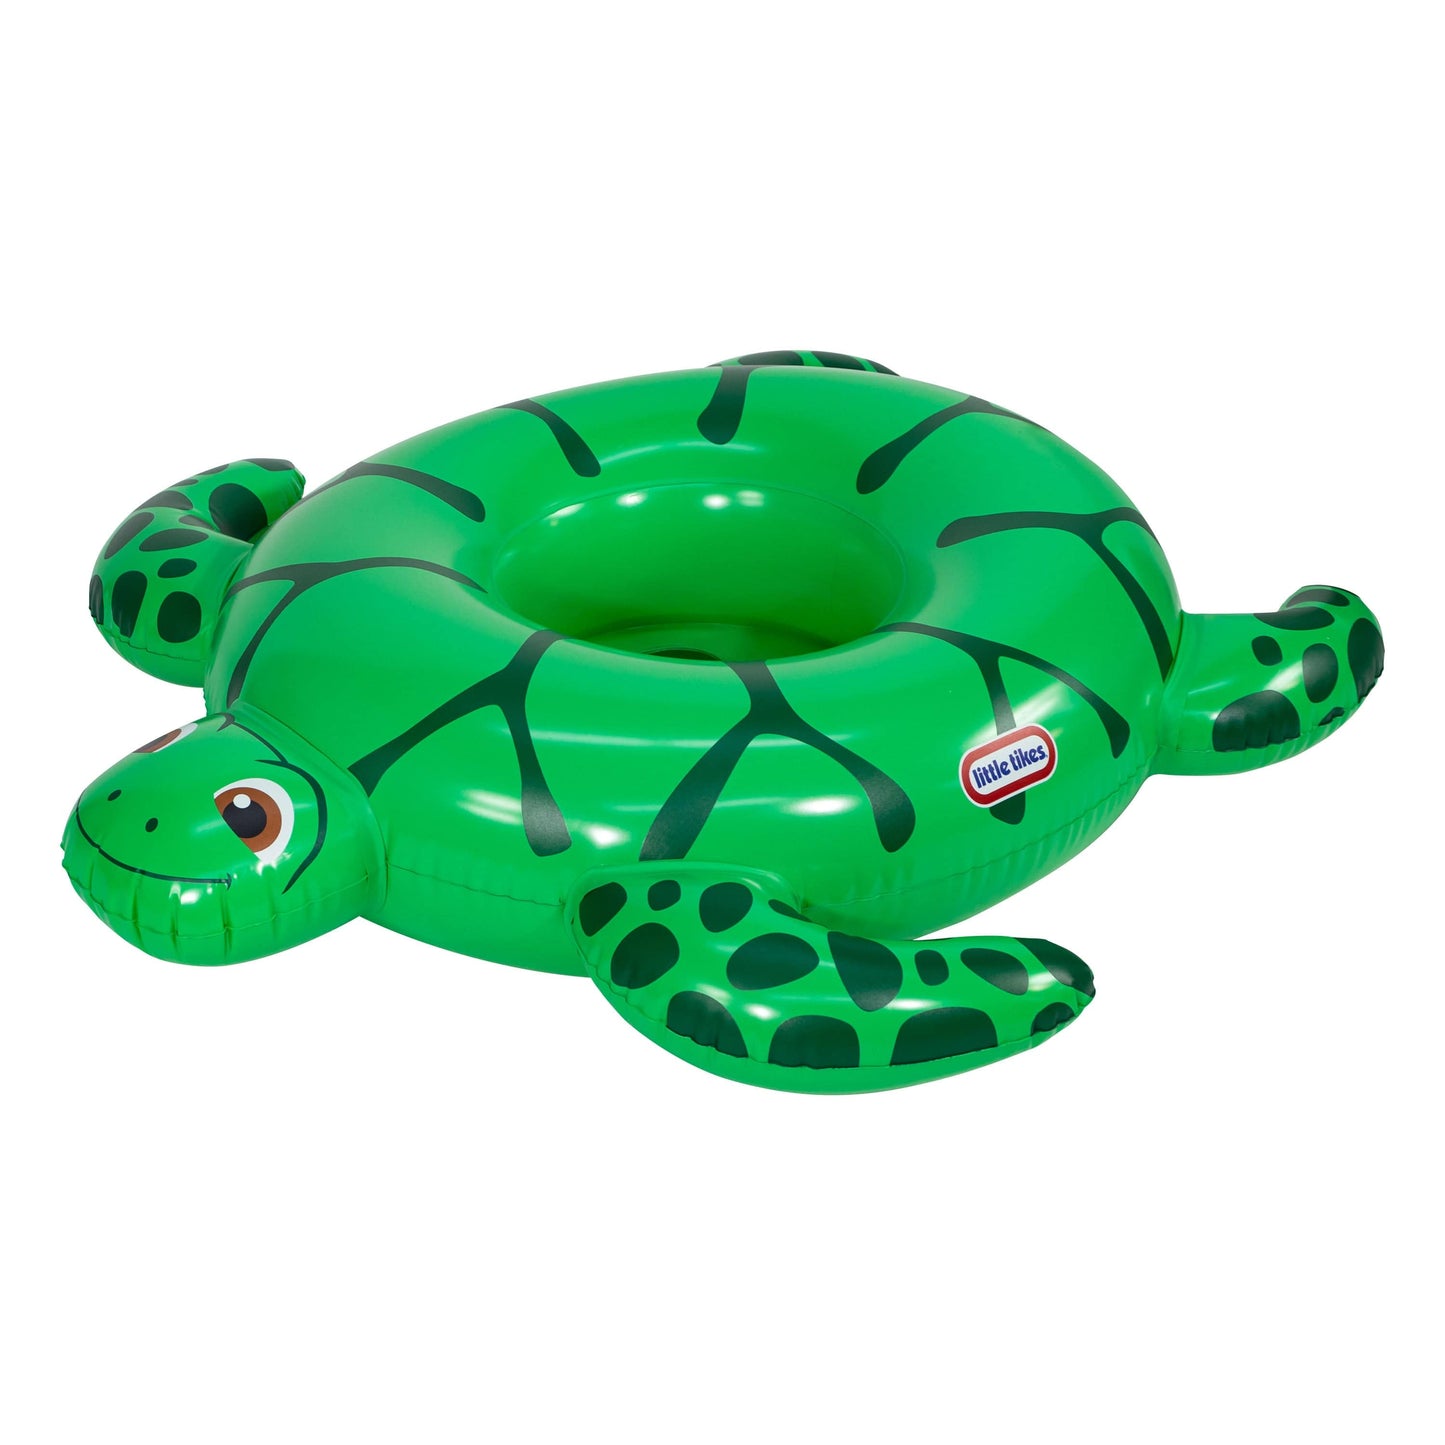 PoolCandy Little Tikes Timmy the Turtle Pool